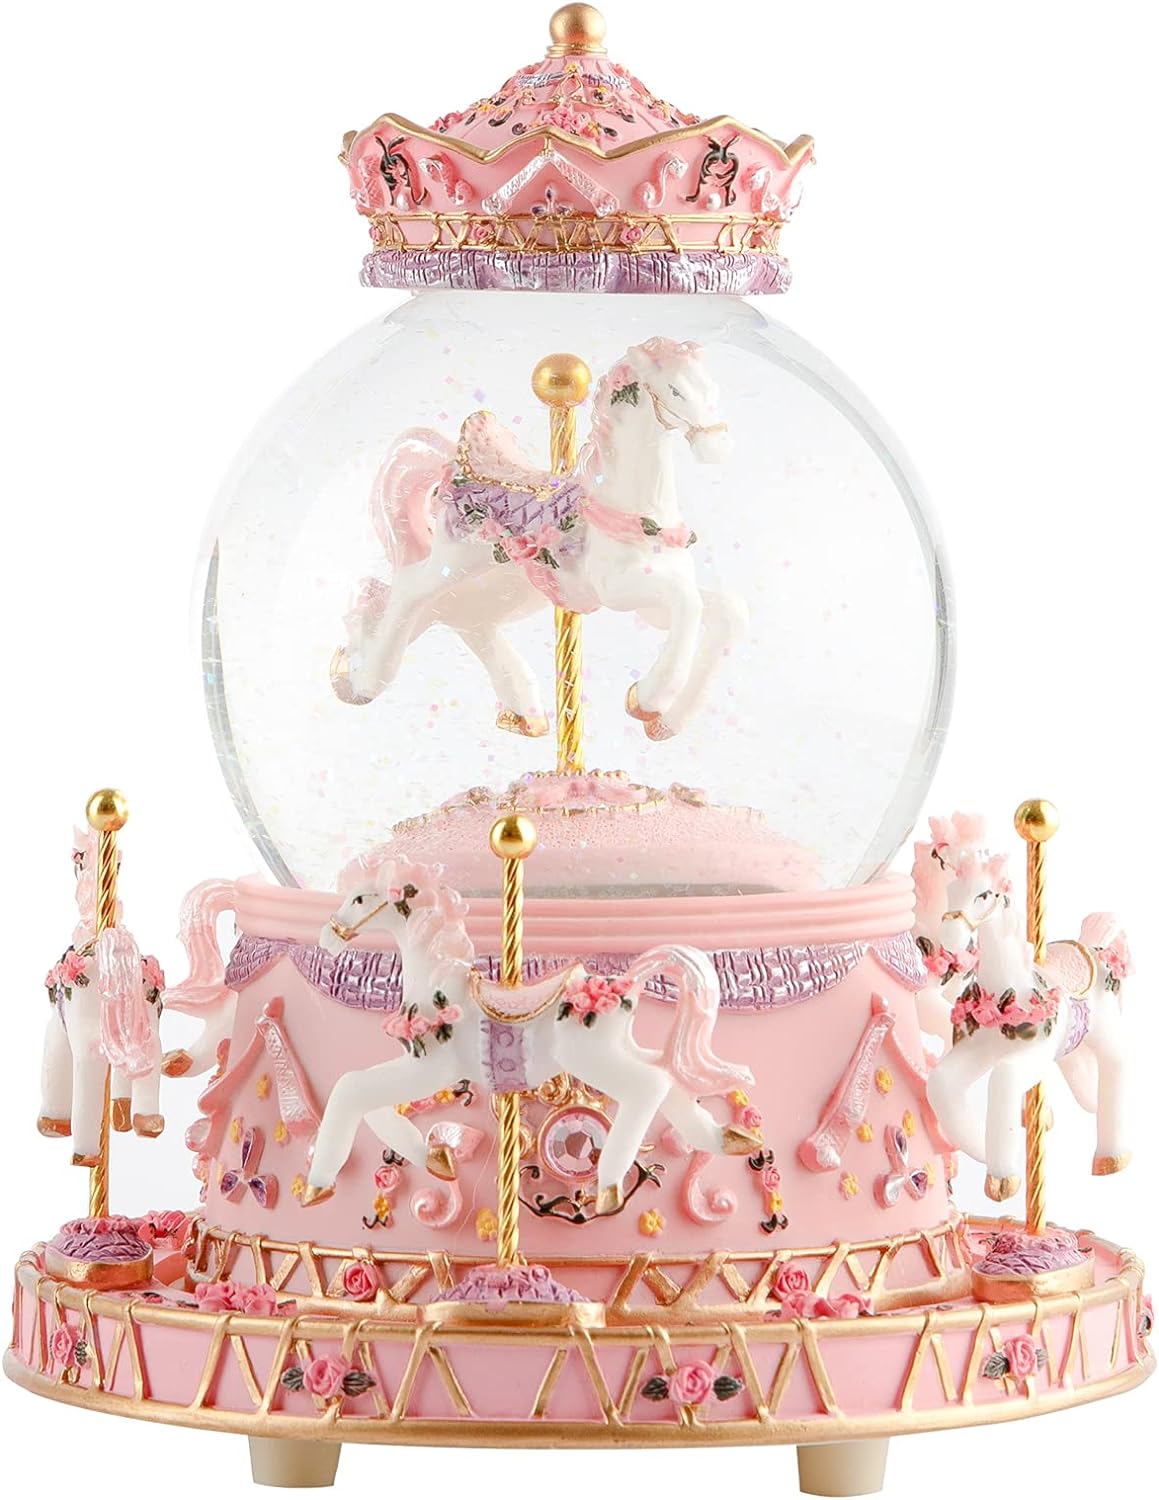 7 Color Changing LED Lights Carousel Horse Music Box Kid Toy Xmas Gift Pink 